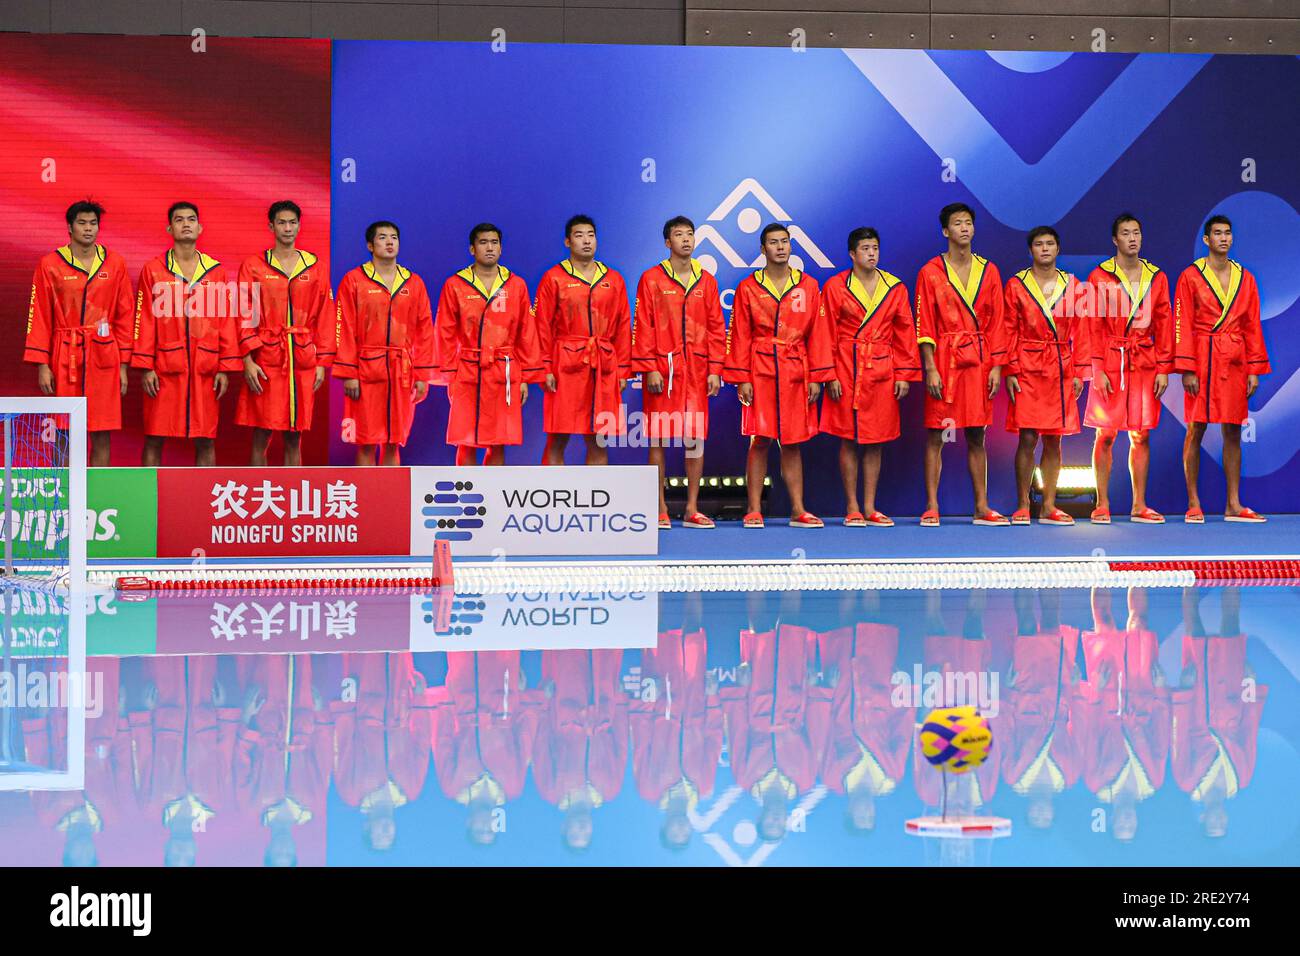 FUKUOKA, JAPAN - JULY 25: Honghui Wu of China, Zhangxin Hu of China, Chenghao Chu of China, Jiahao Peng of China, Jinpeng Zhang of China, Zekai Xie of China, Zhongxian Chen of China, Rui Chen of China, Yimin Chen of China, Yu Liu of China, Chufeng Zhang of China, Dingsong Shen of China, Zhiwei Liang of China during the national anthem during the World Aquatics Championships 2023 Men's Waterpolo classification 15th-16th place match between China and South Africa on July 25, 2023 in Fukuoka, Japan (Photo by Albert ten Hove/Orange Pictures) Stock Photo